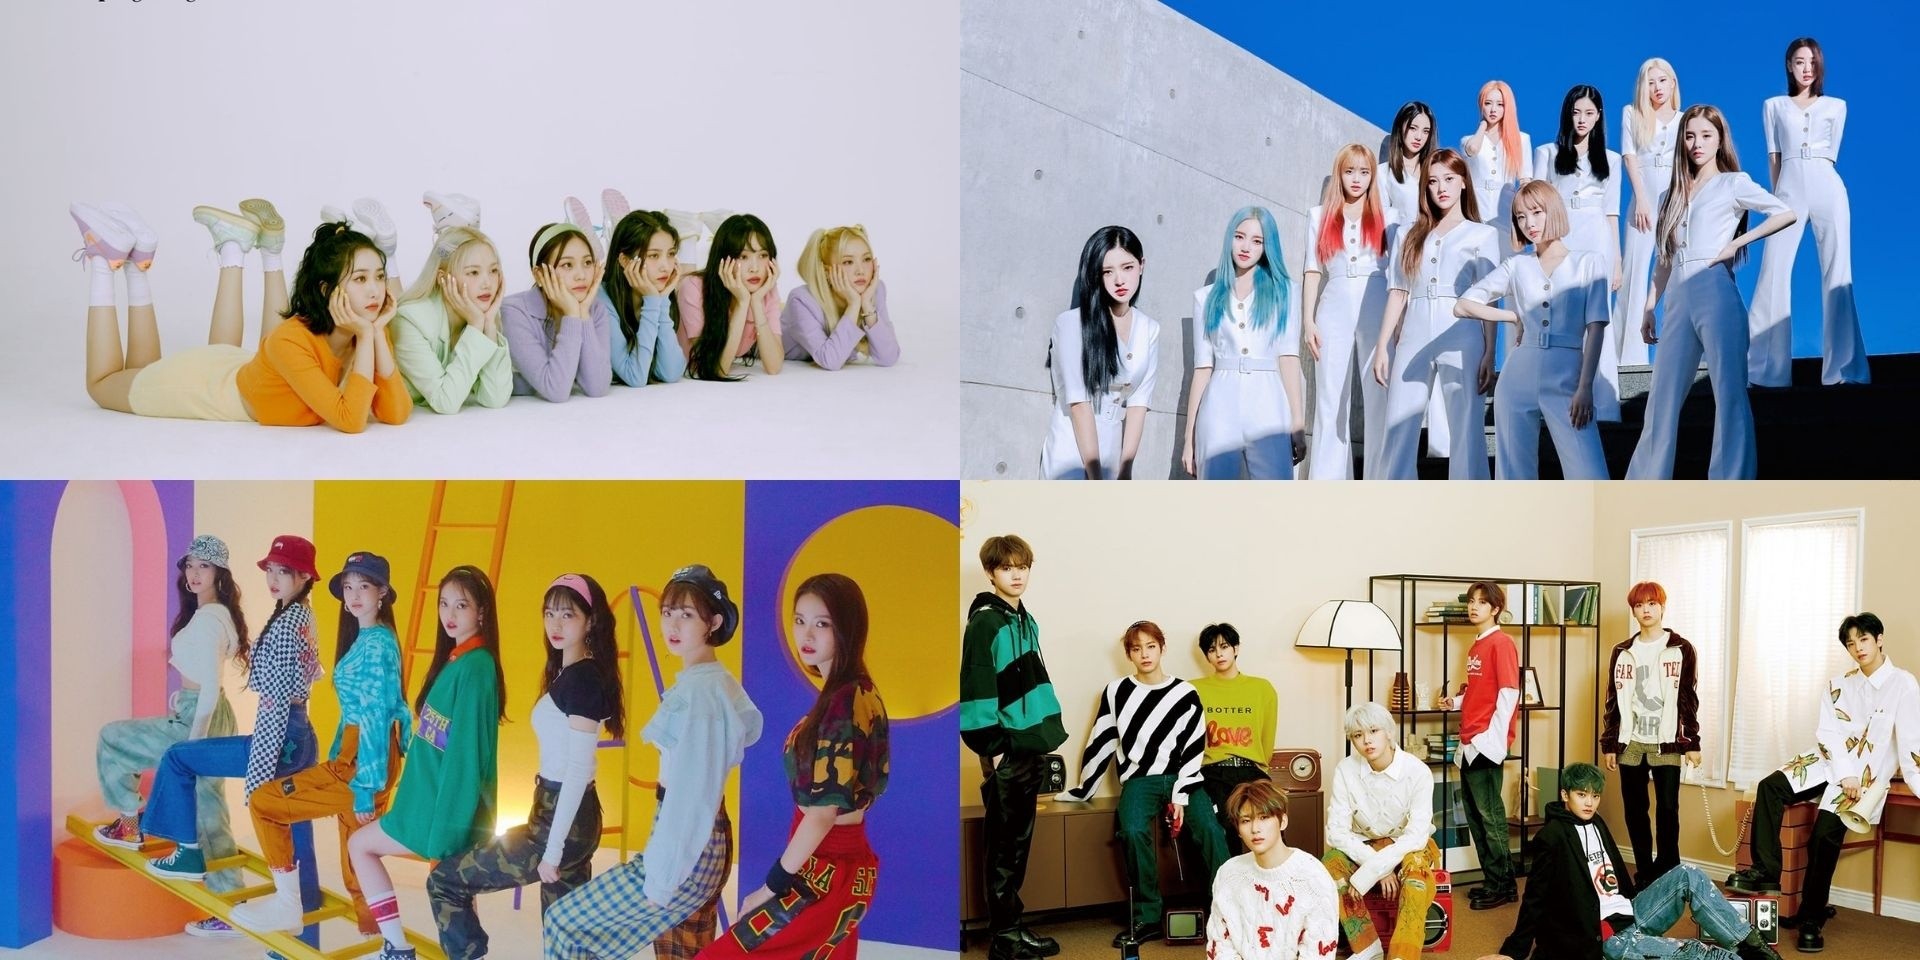 GFRIEND, LOONA, Weeekly, CRAVITY, and more to perform at ‘2021 Ontact G★KPOP Concert’ this May